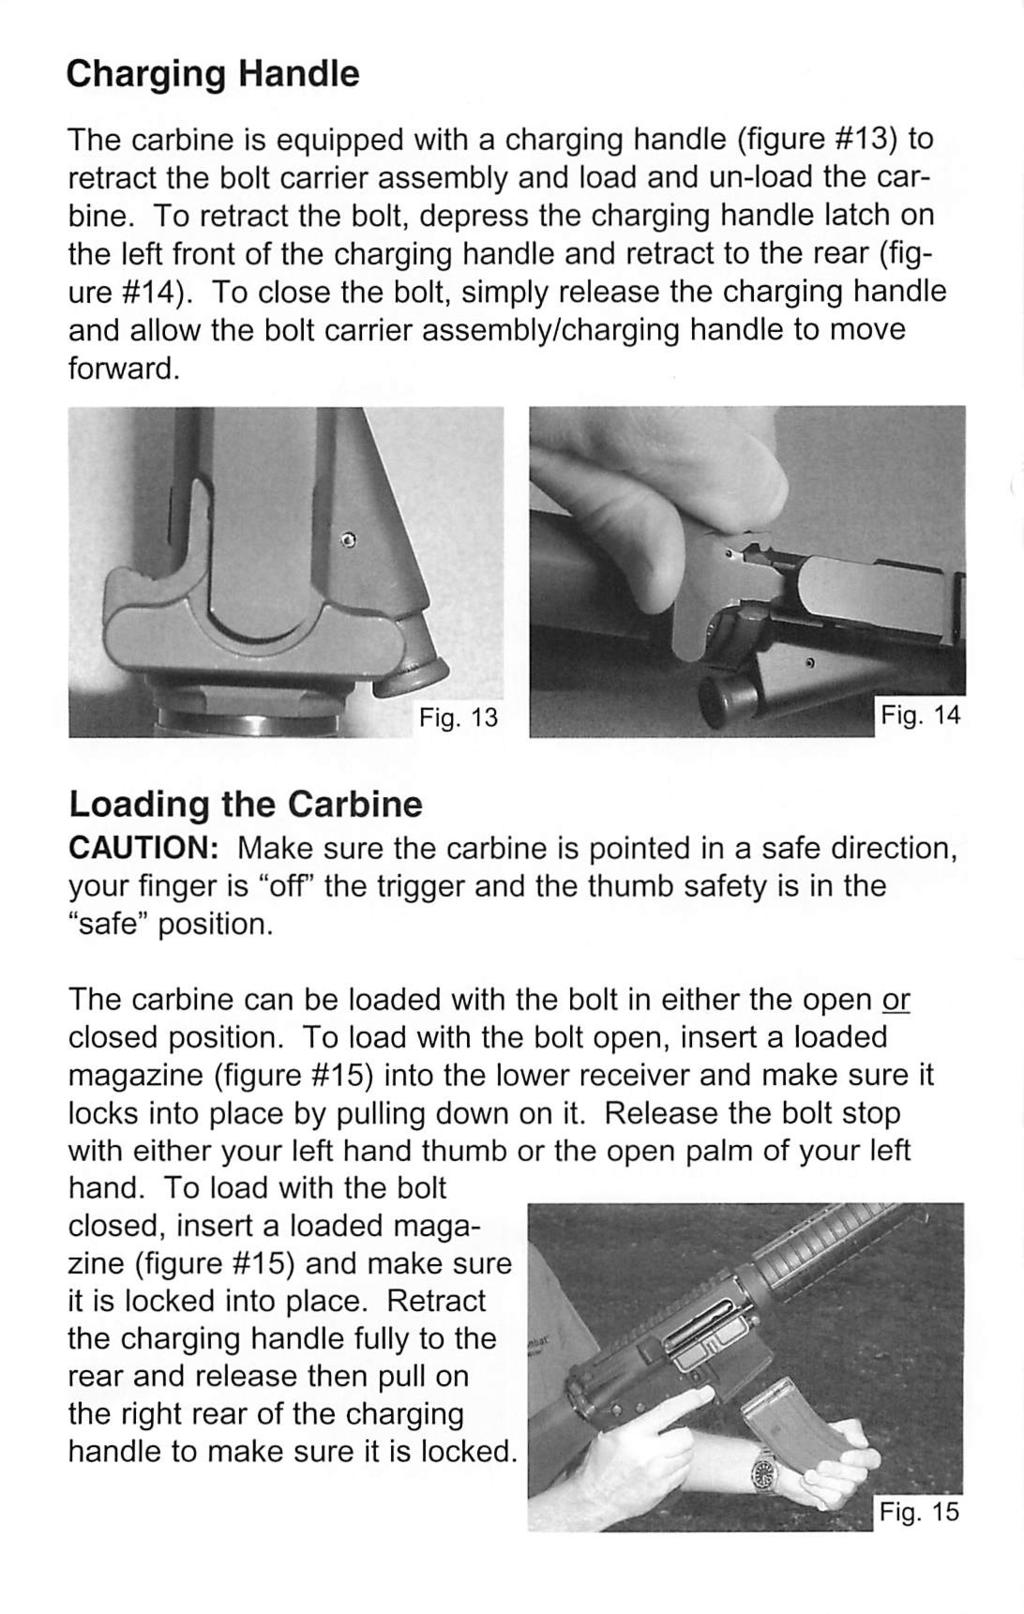 Charging Handle The carbine is equipped with a charging handle (figure #13) to retract the bolt carrier assembly and load and un-load the car bine.